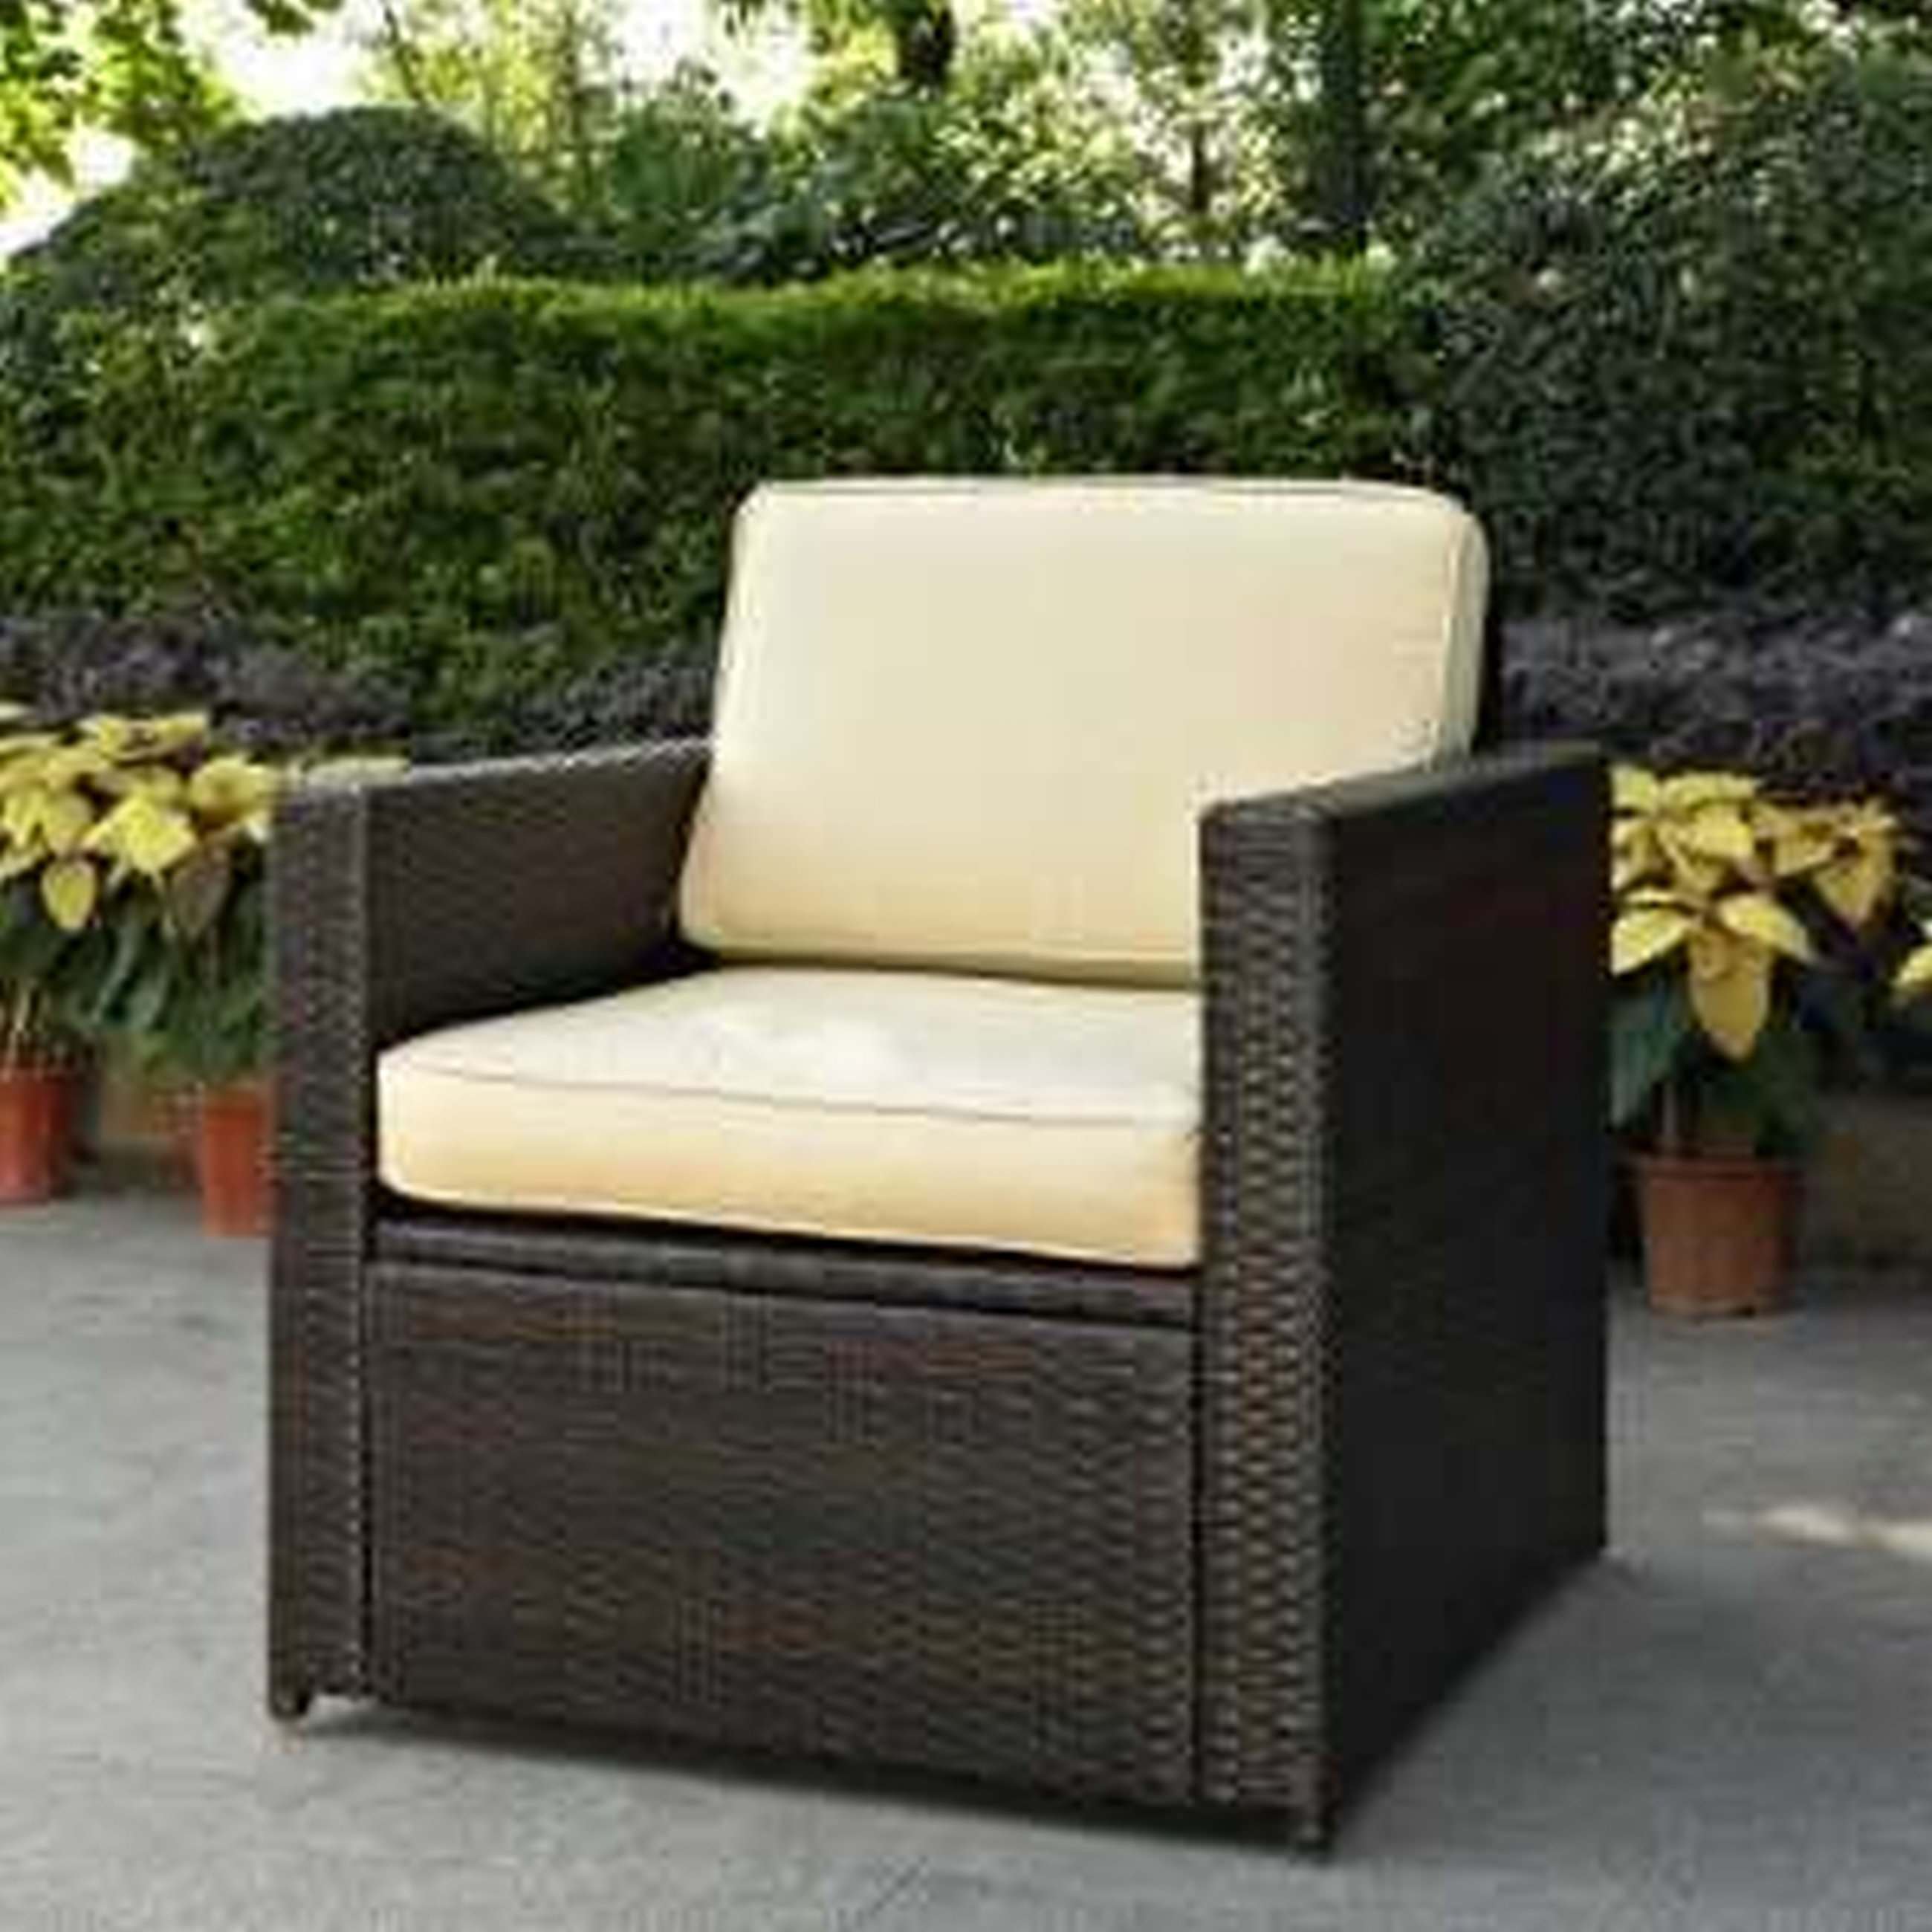 Deep Seating Patio Furniture Replacement Cushions Ideas